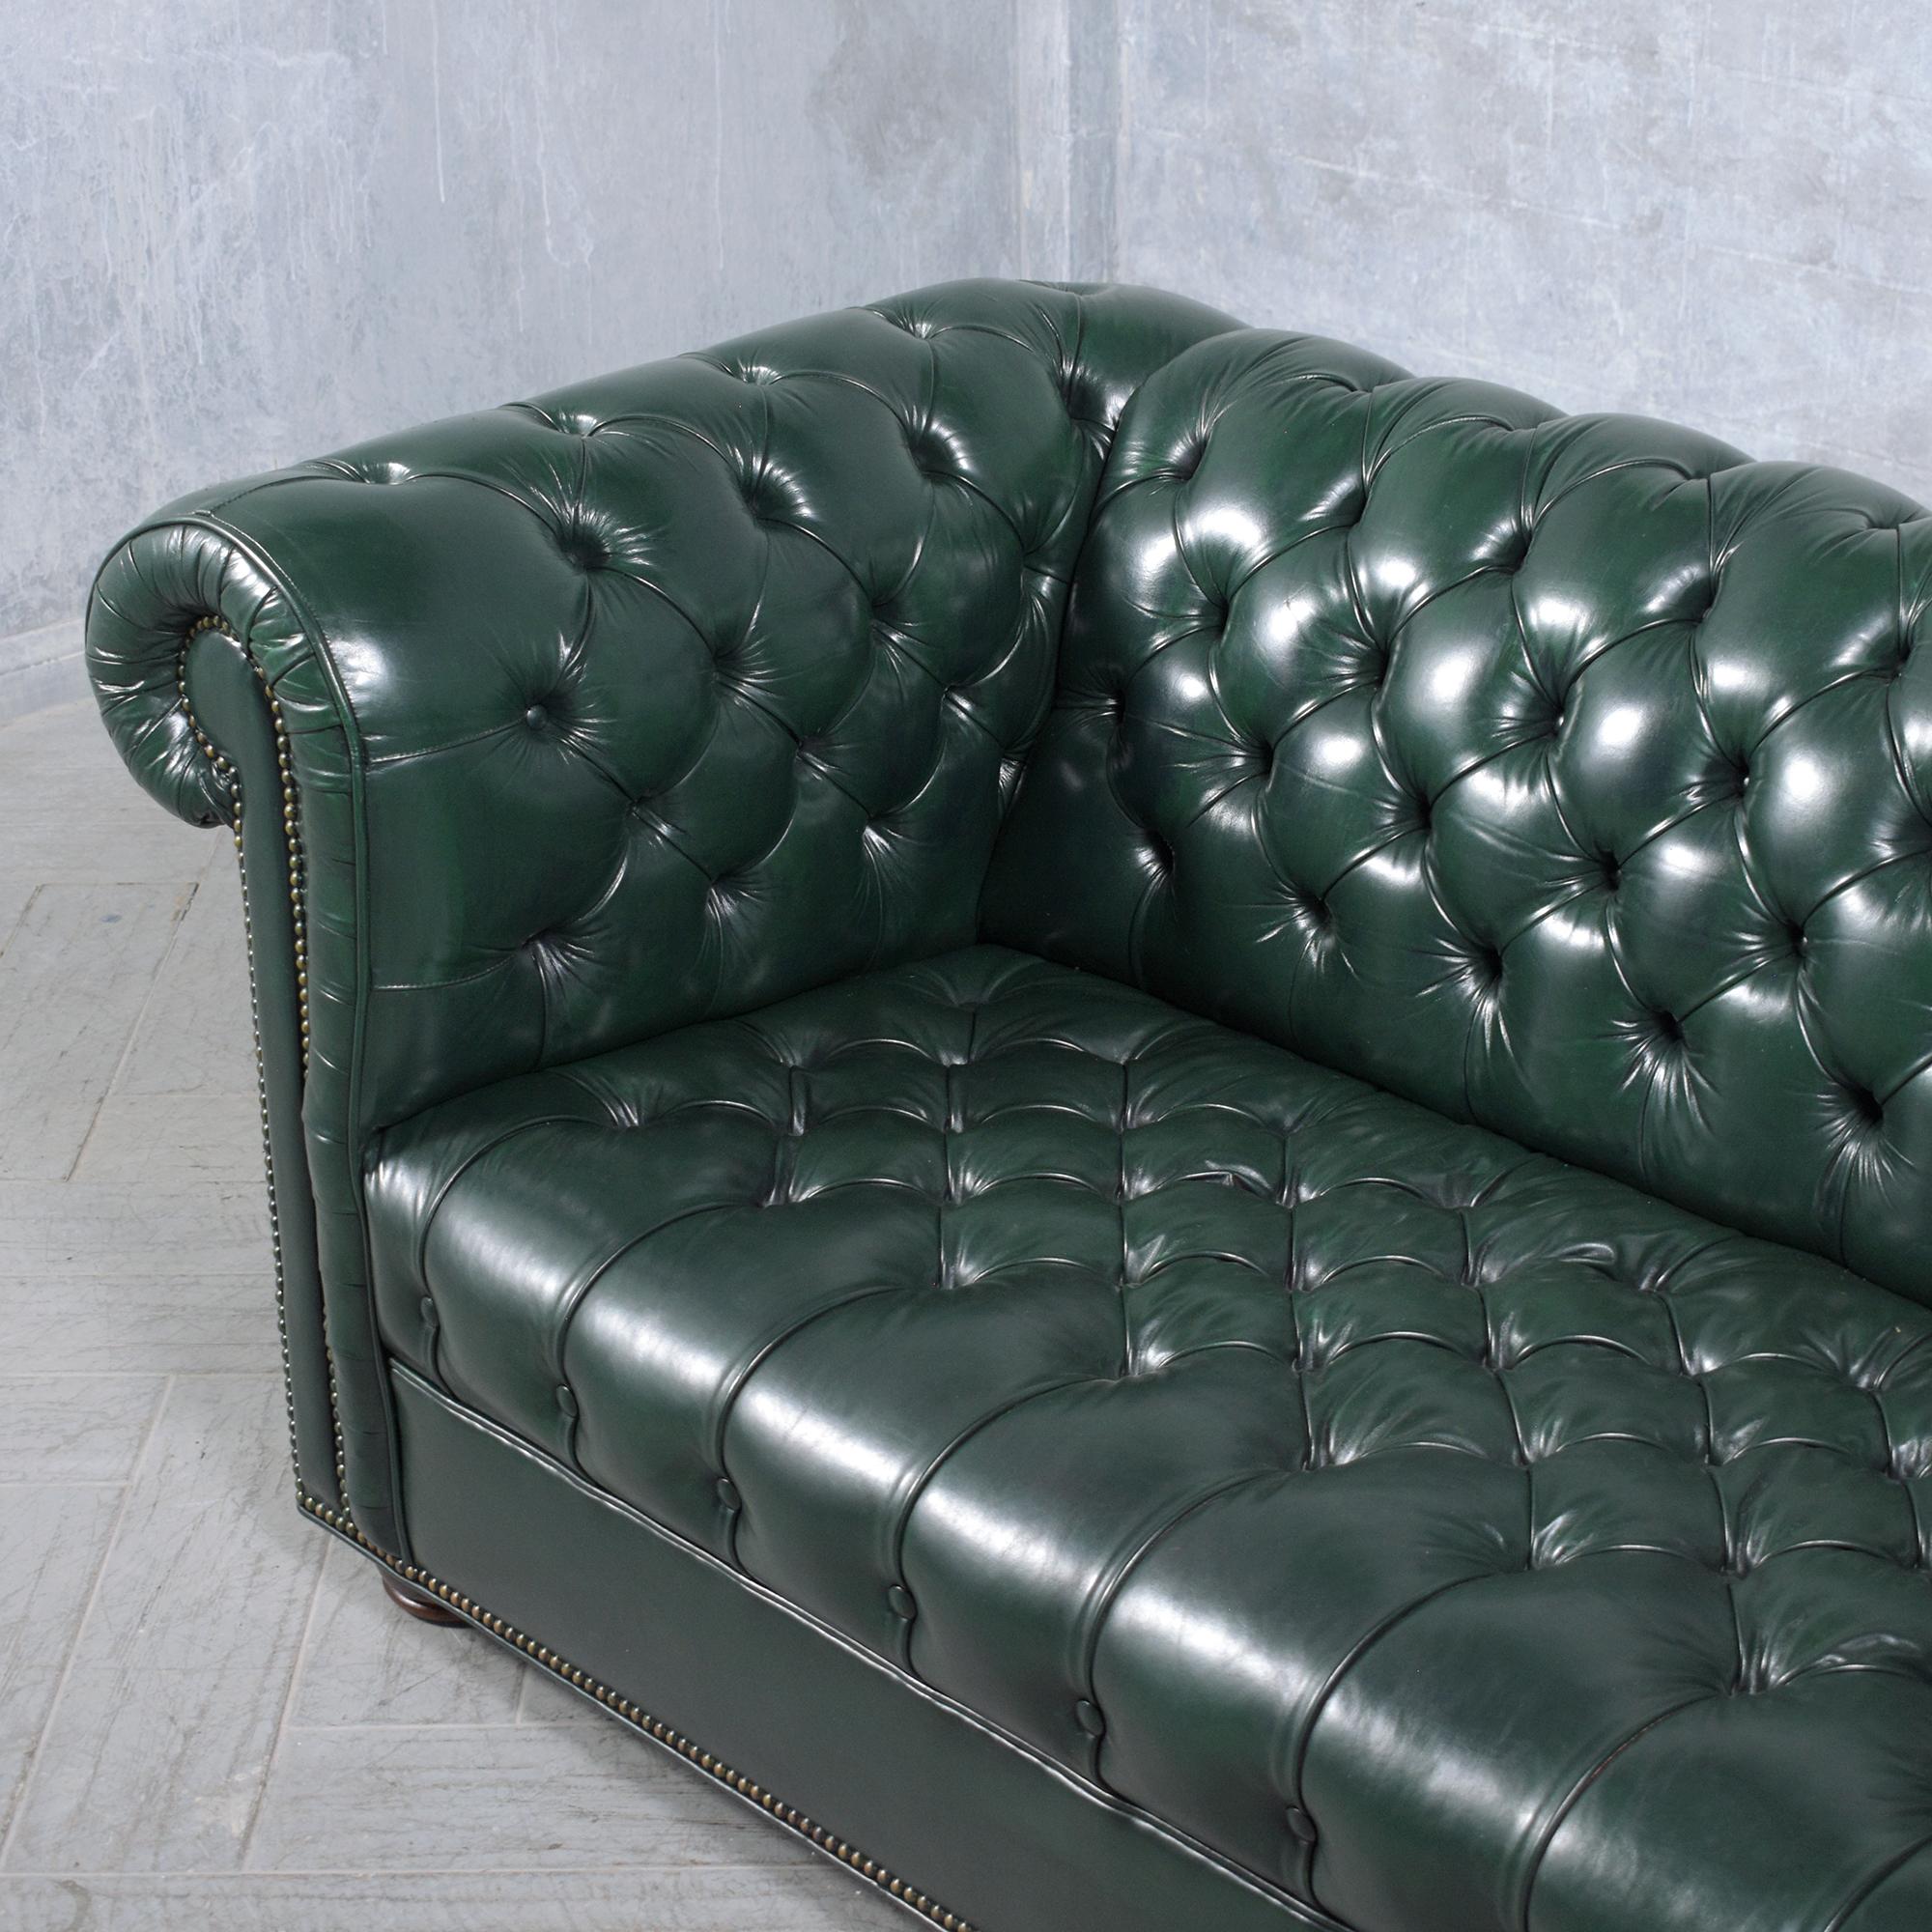 1970s Vintage Chesterfield Sofa: Emerald Green Leather with Elegant Carved Legs 1